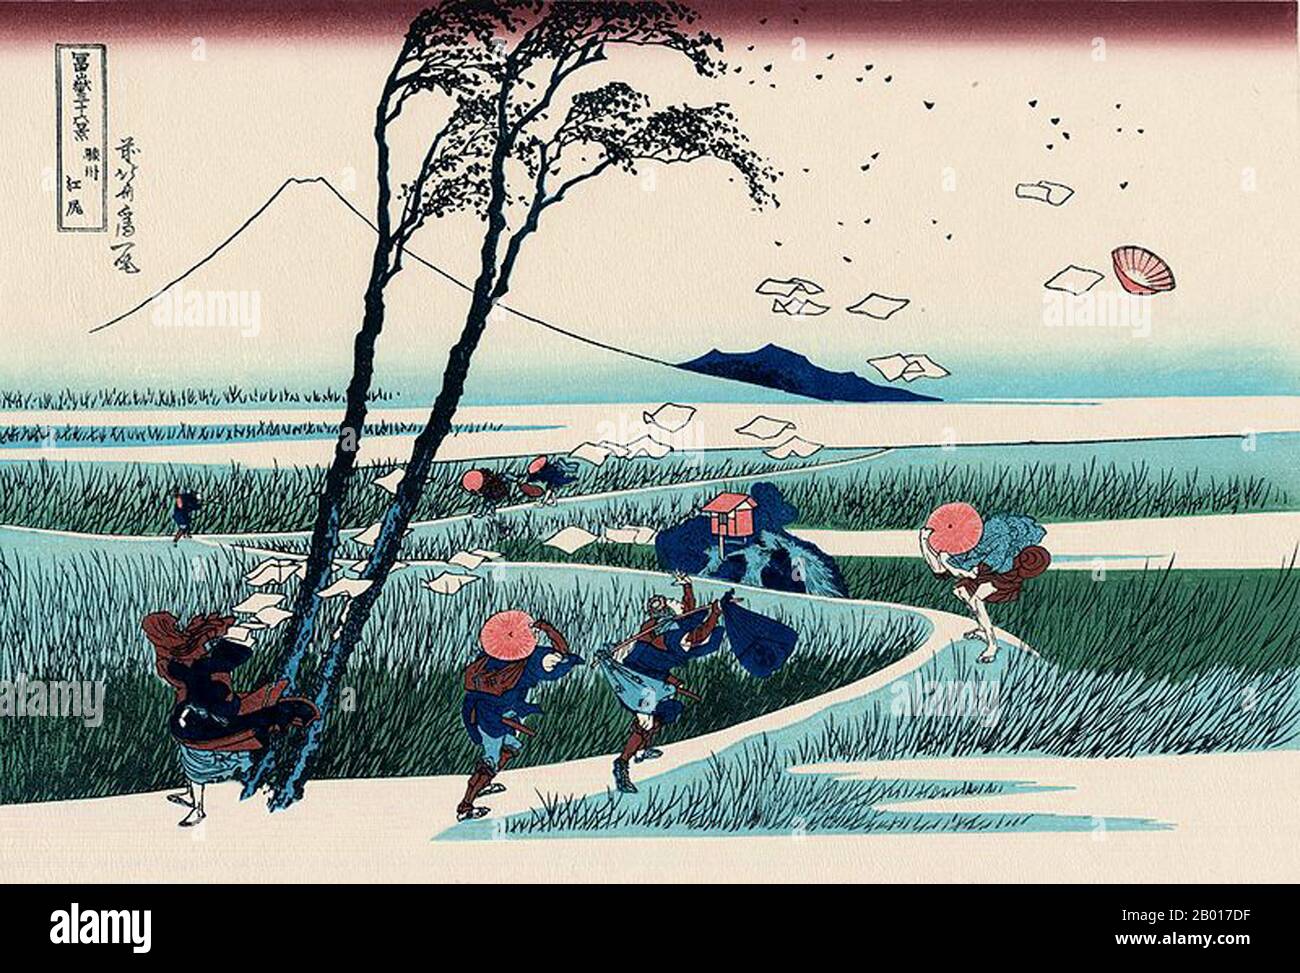 Japan: ‘Ejiri in Suruga Province’. Ukiyo-e woodblock print from the series ‘Thirty-Six Views of Mount Fuji’ by Katsushika Hokusai (31 October 1760 - 10 May 1849), 1830.  ‘Thirty-six Views of Mount Fuji’ is an ‘ukiyo-e’ series of woodcut prints by Japanese artist Katsushika Hokusai. The series depicts Mount Fuji in differing seasons and weather conditions from a variety of places and distances. It actually consists of 46 prints created between 1826 and 1833. The first 36 were included in the original publication and, due to their popularity, 10 more were added after the original publication. Stock Photo